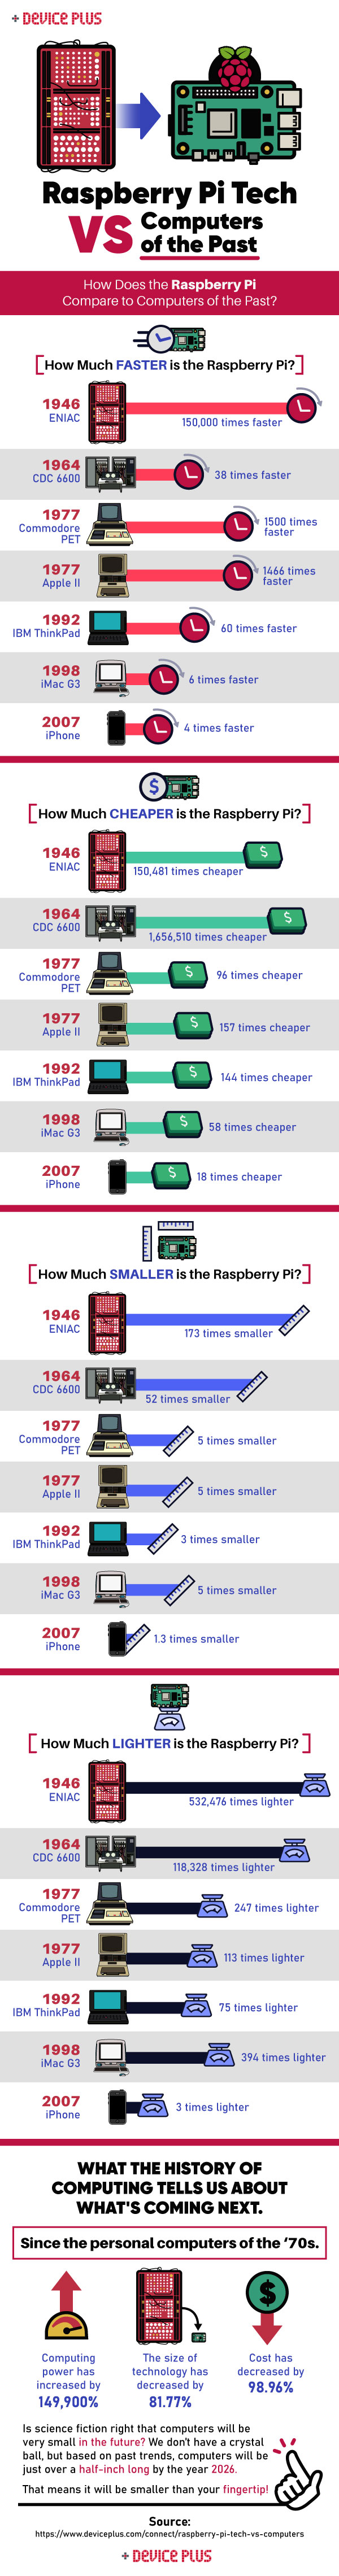 Raspberry Pi Compared to Past Computers